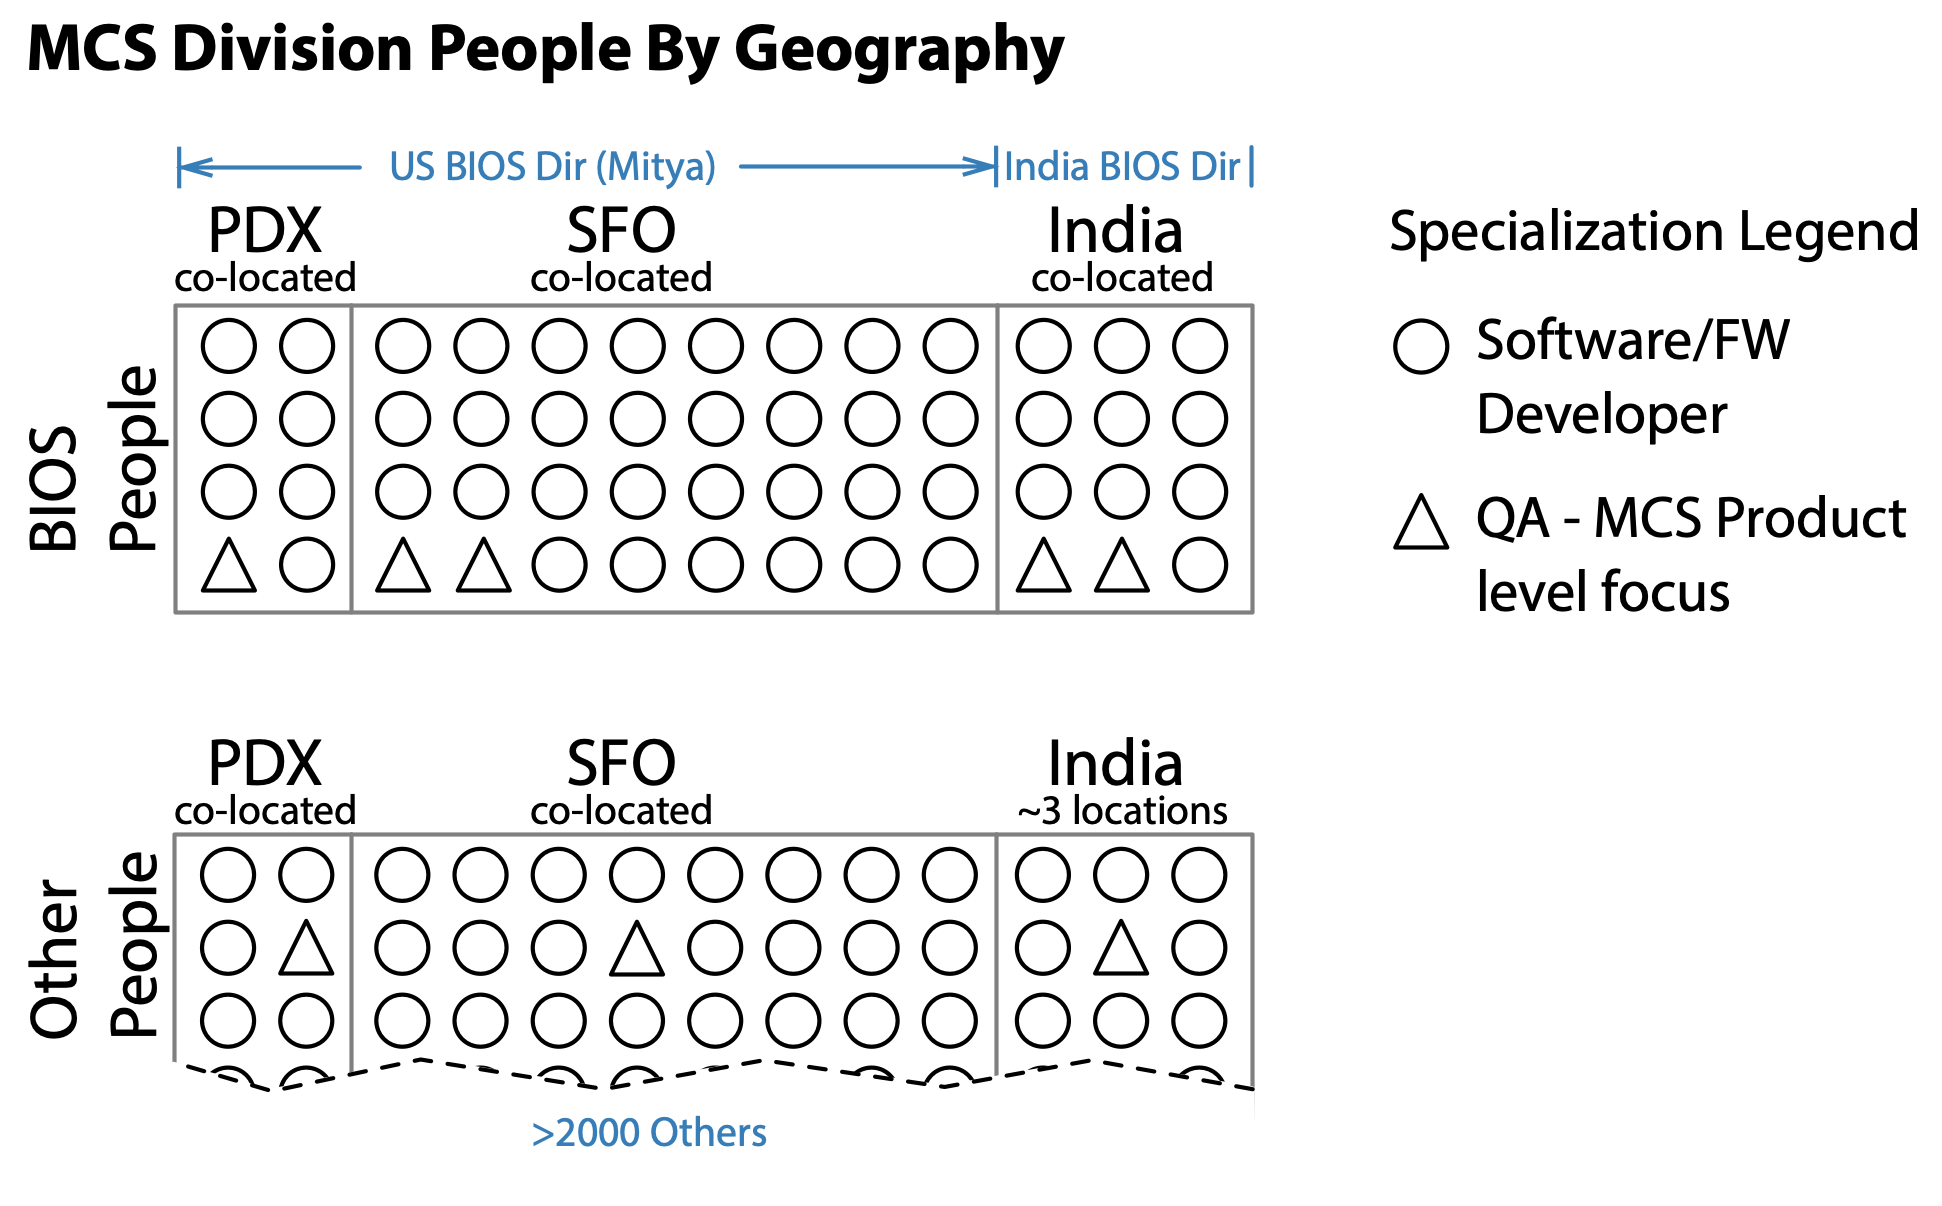 MCS Division People By Geography